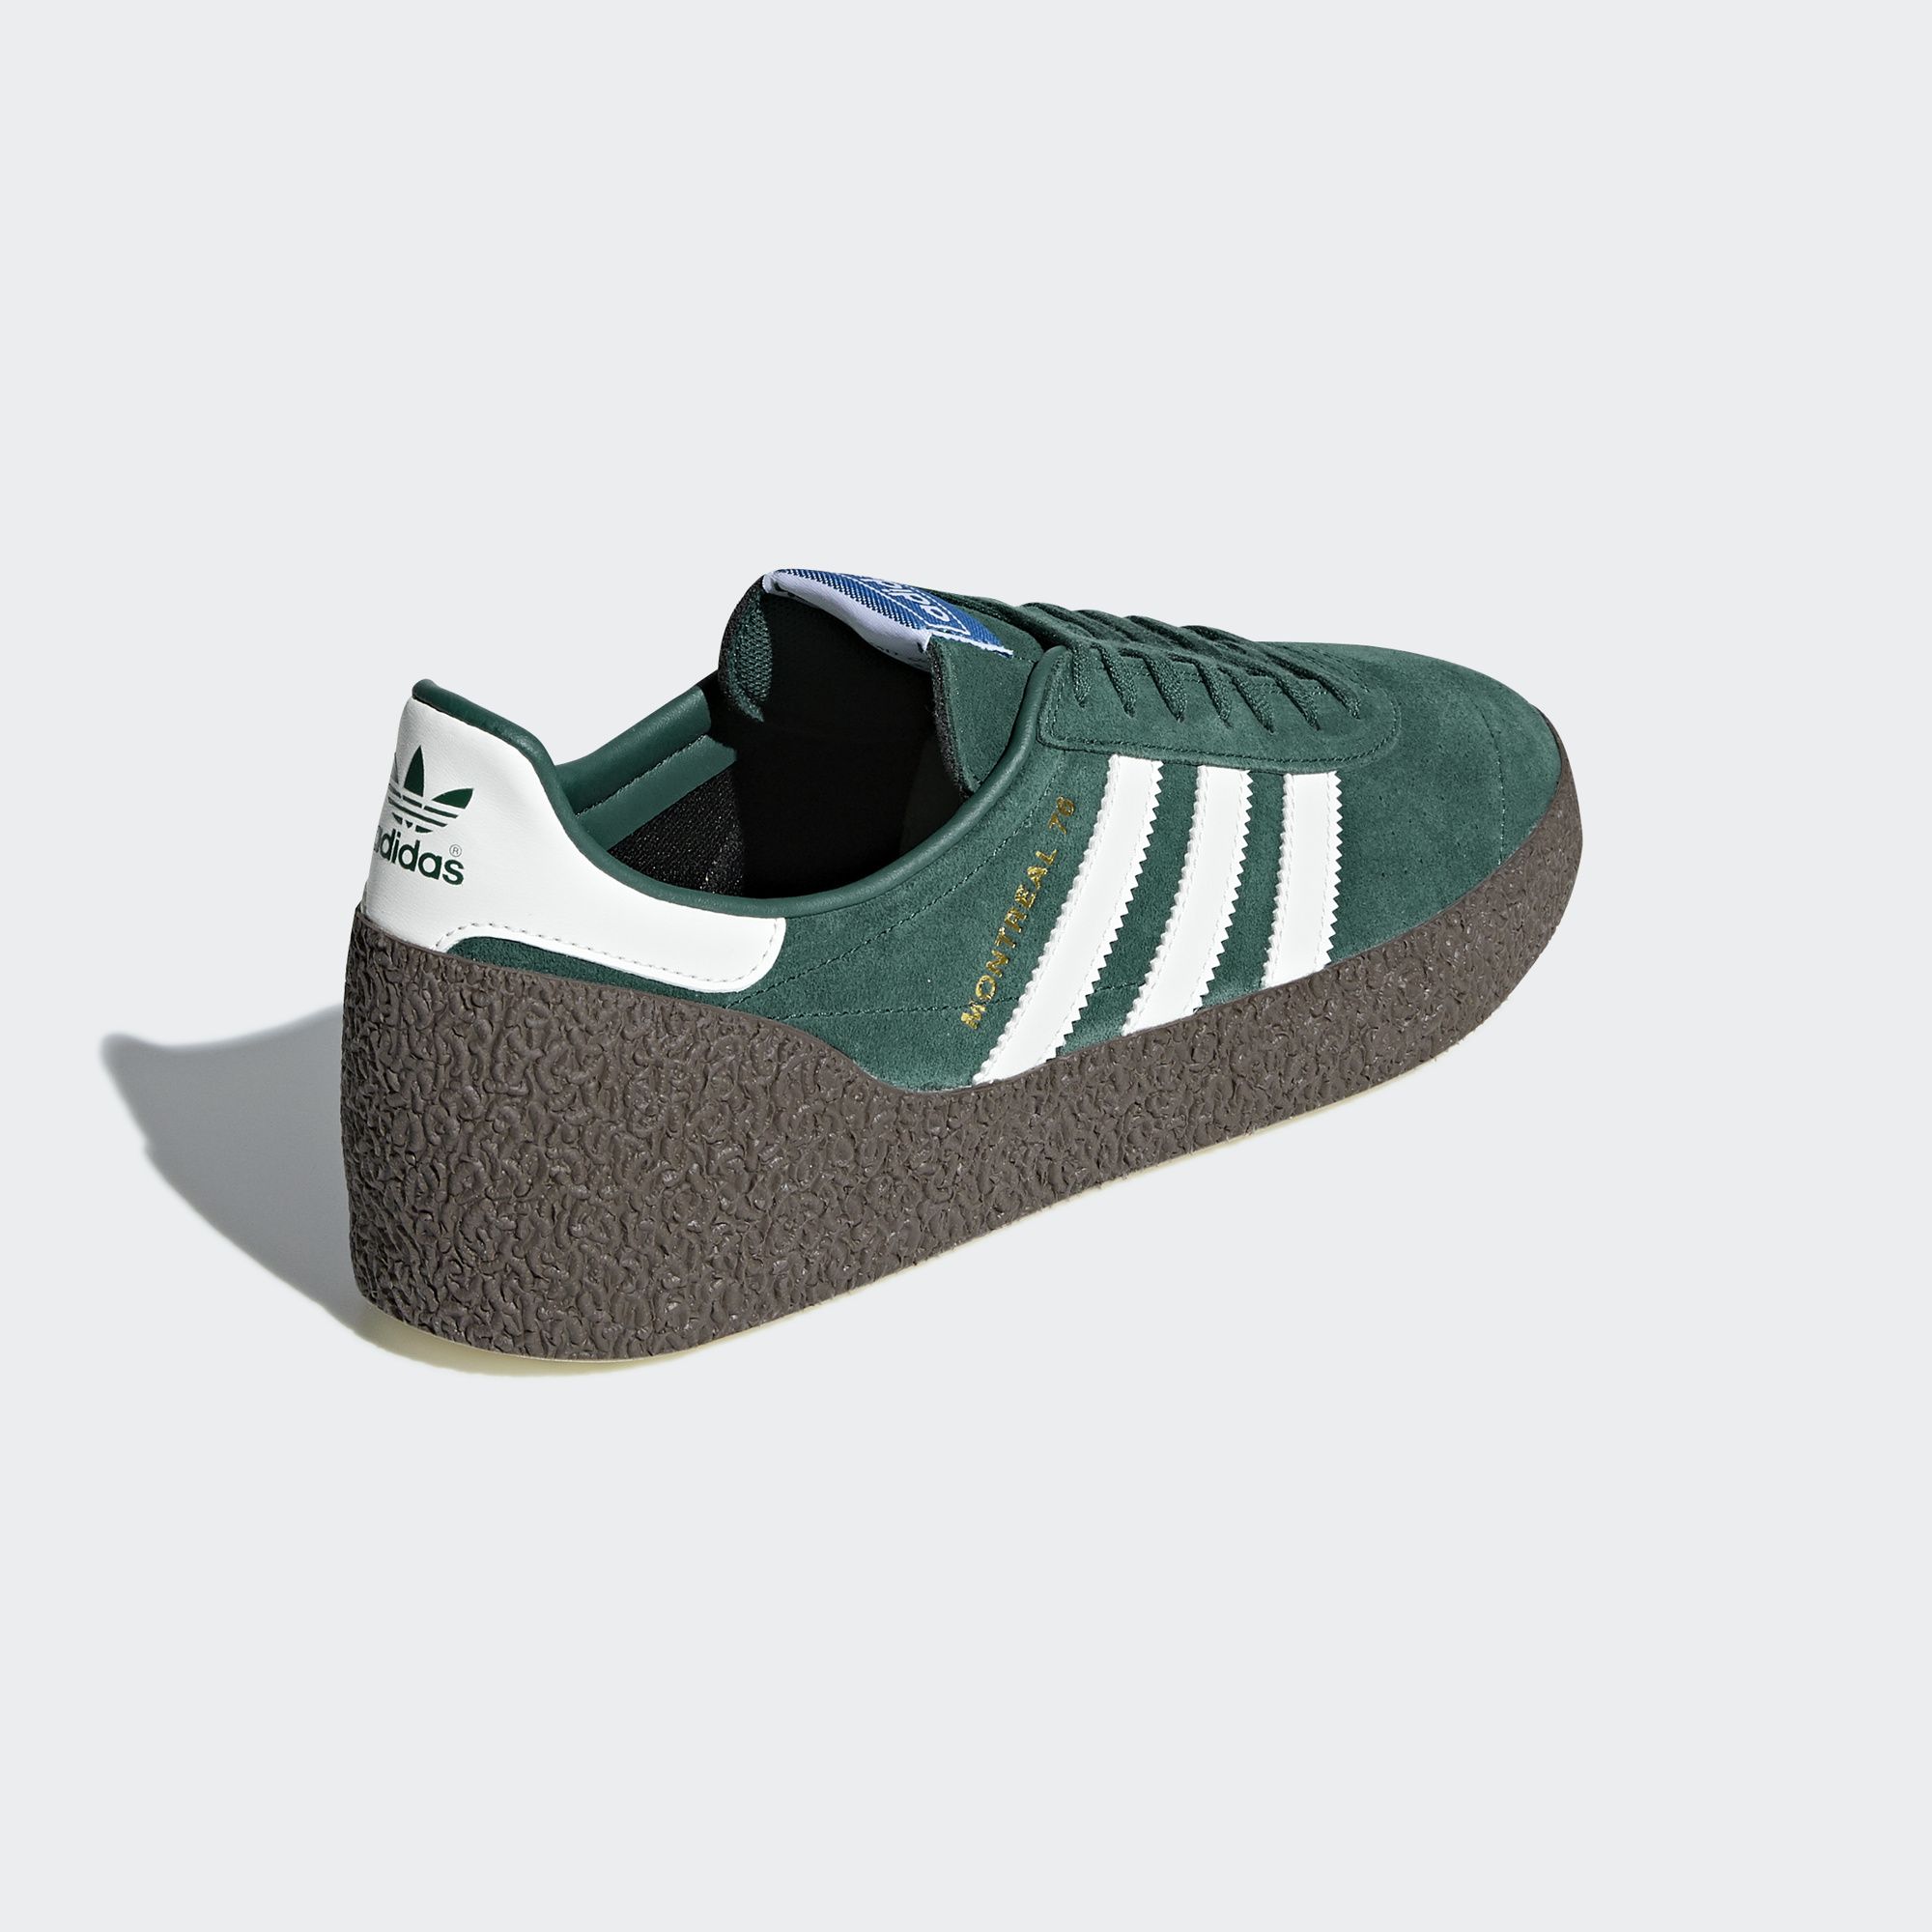 The adidas Shoe of the 1976 Montreal Summer Games is Making a